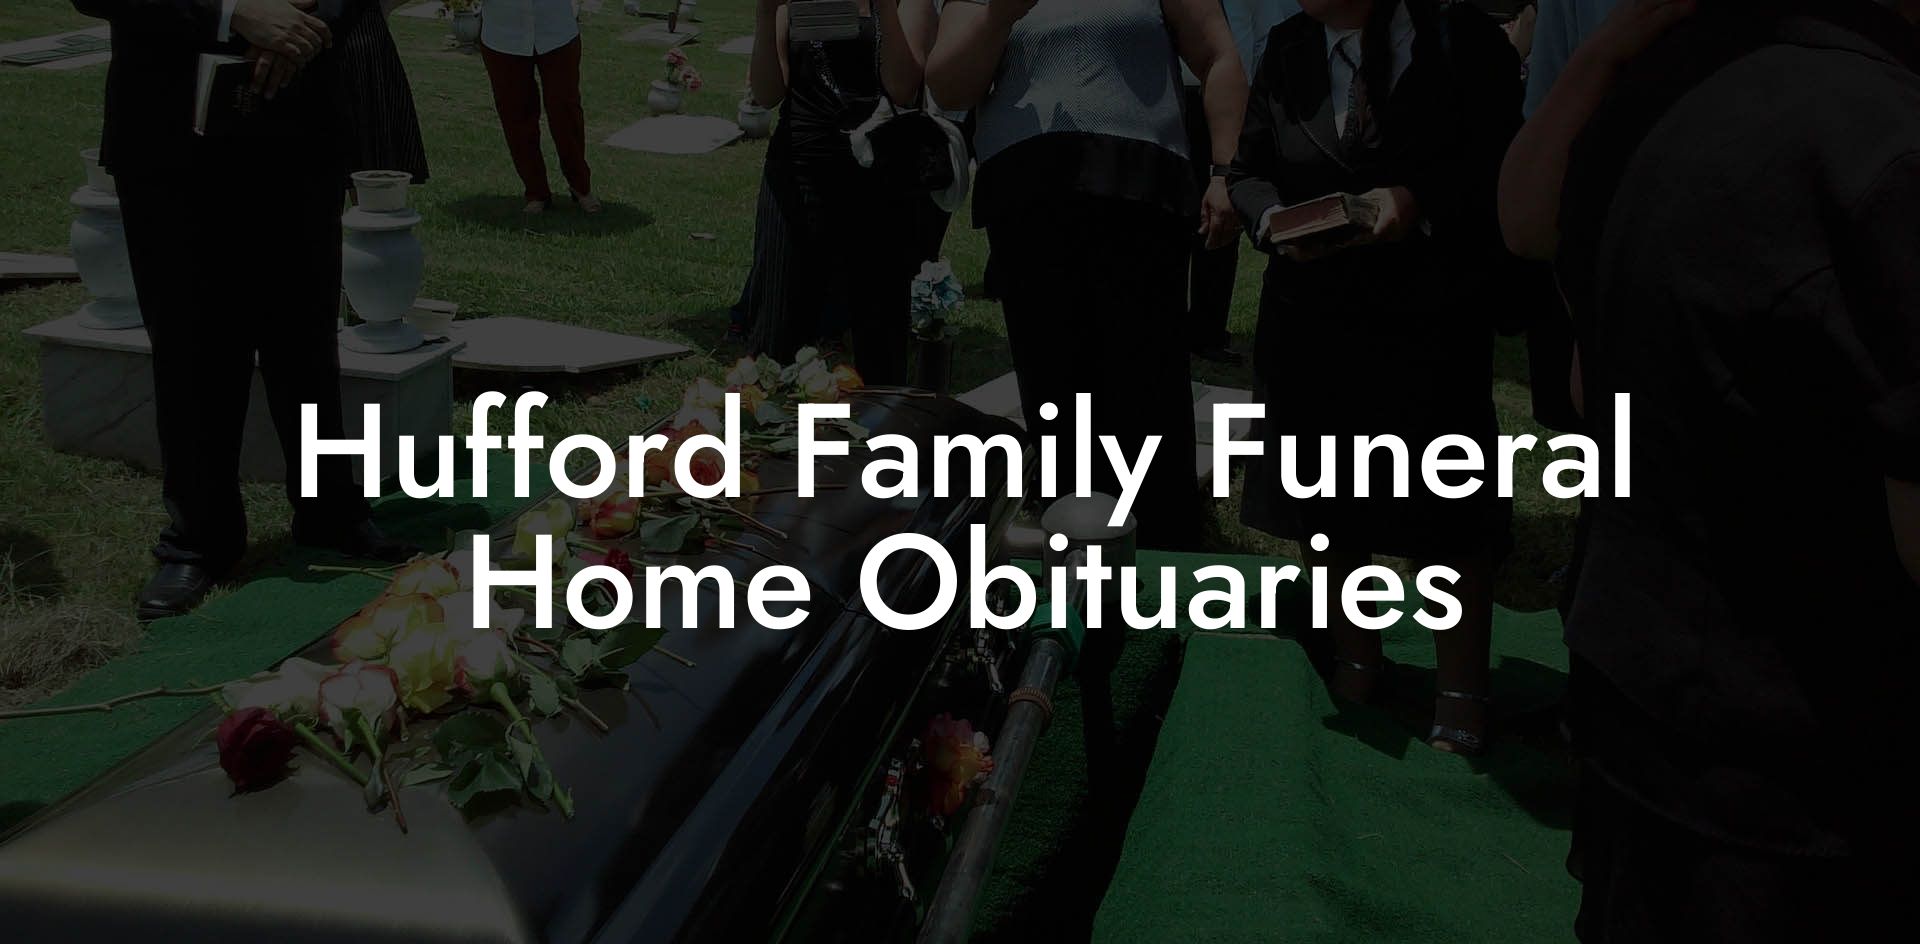 Hufford Family Funeral Home Obituaries